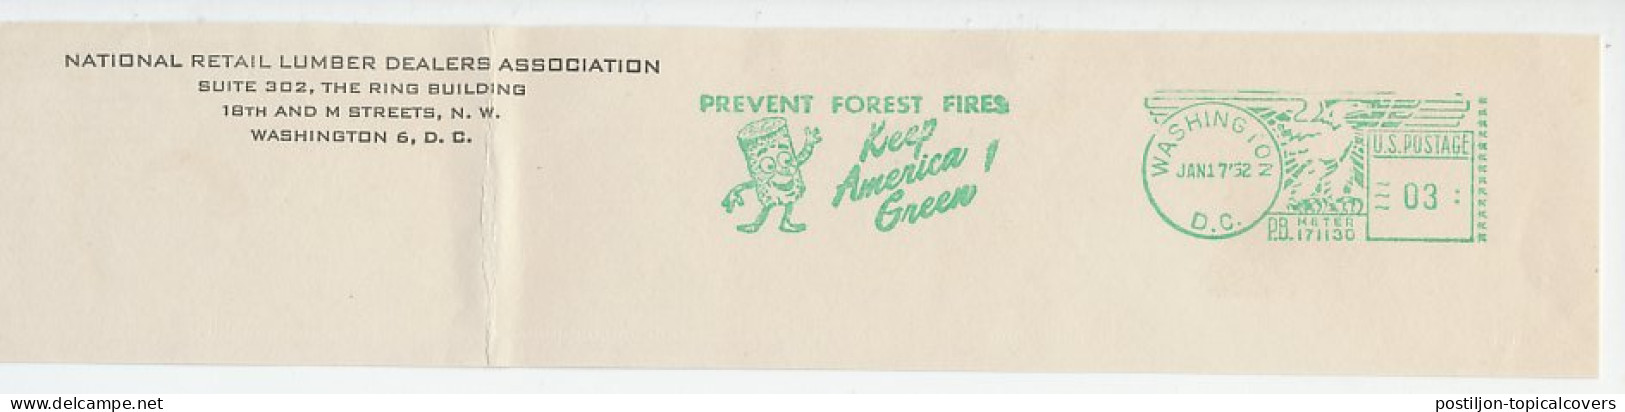 Meter Top Cut USA 1952 Prevent Forest Fires - Bombero